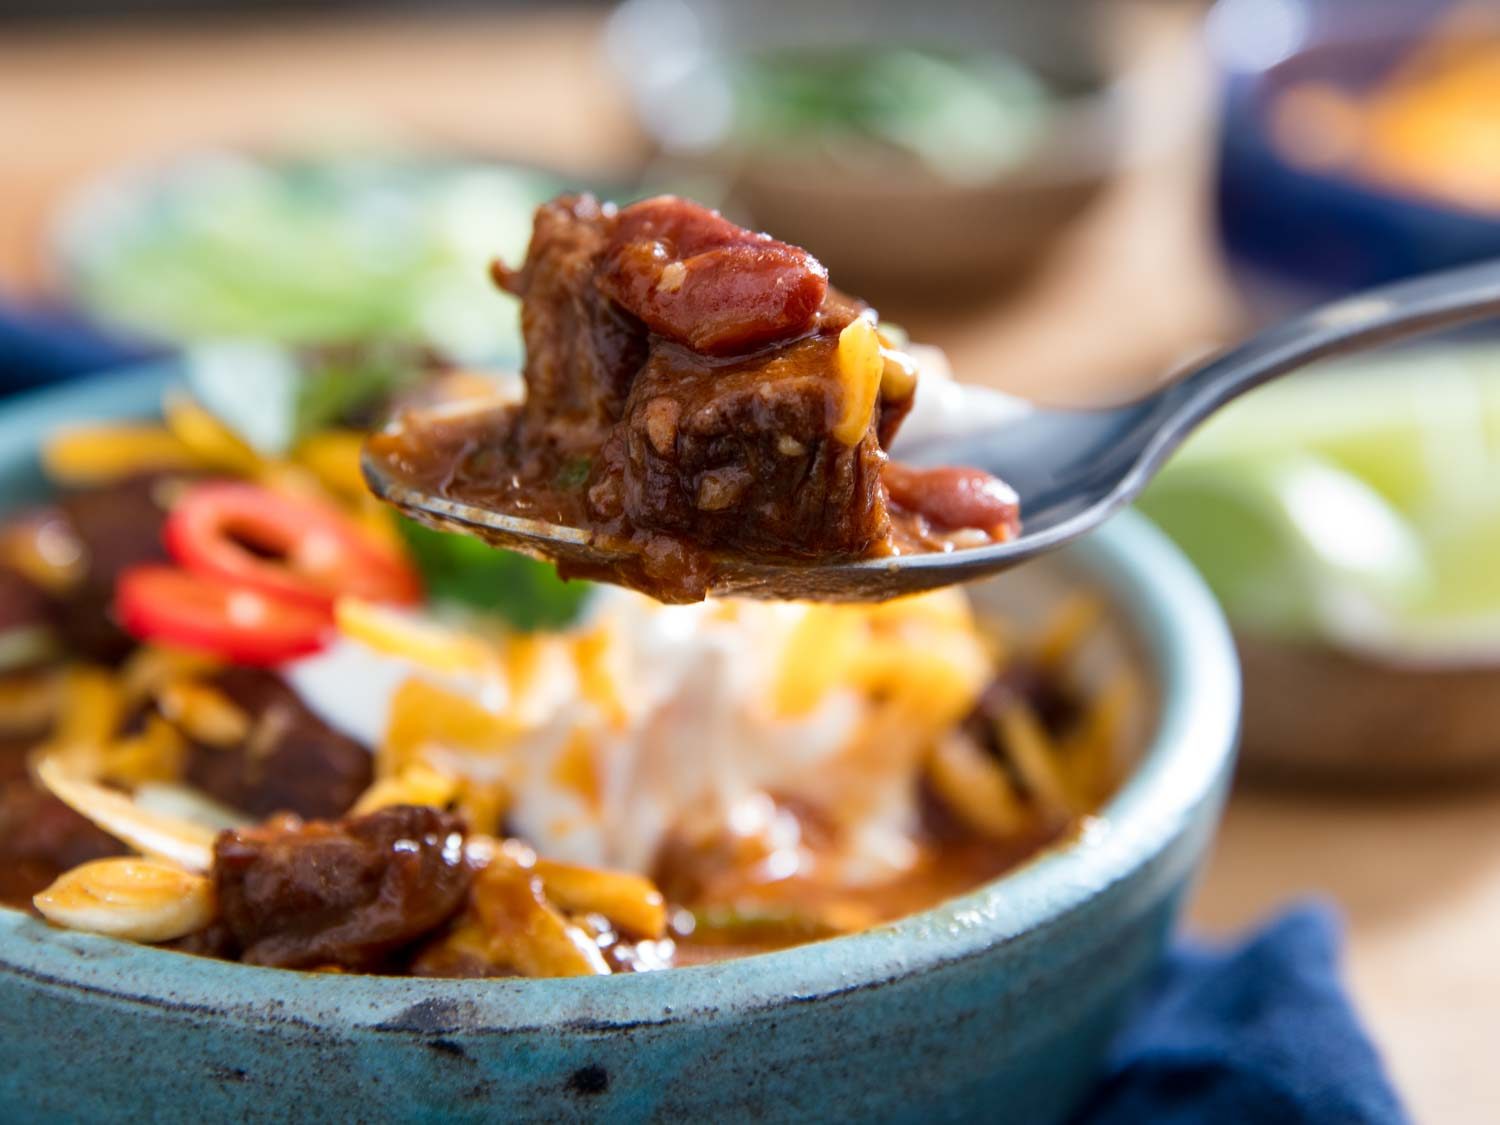 A spoonful of chunky chili